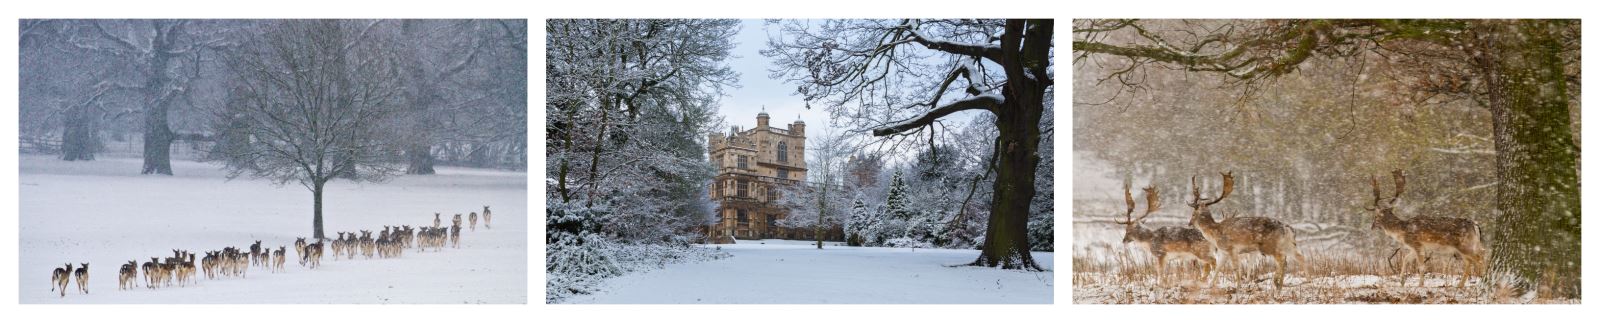 Winter at Wollaton Hall - Photography by Chris Denning